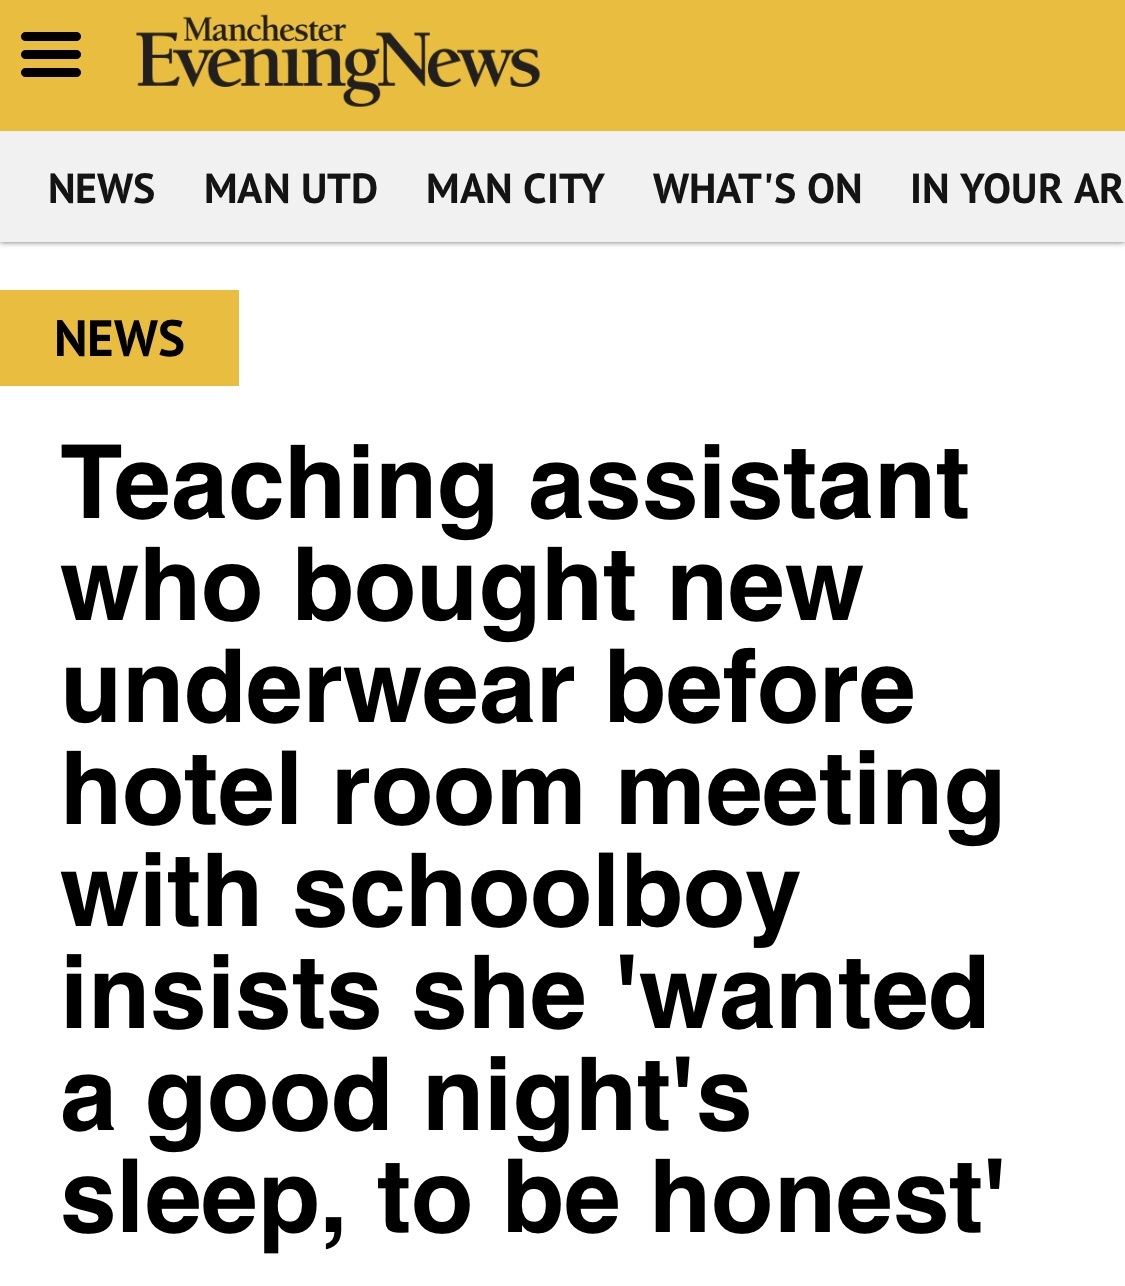 Female teaching assistant caught trying to sleep with schoolboy.